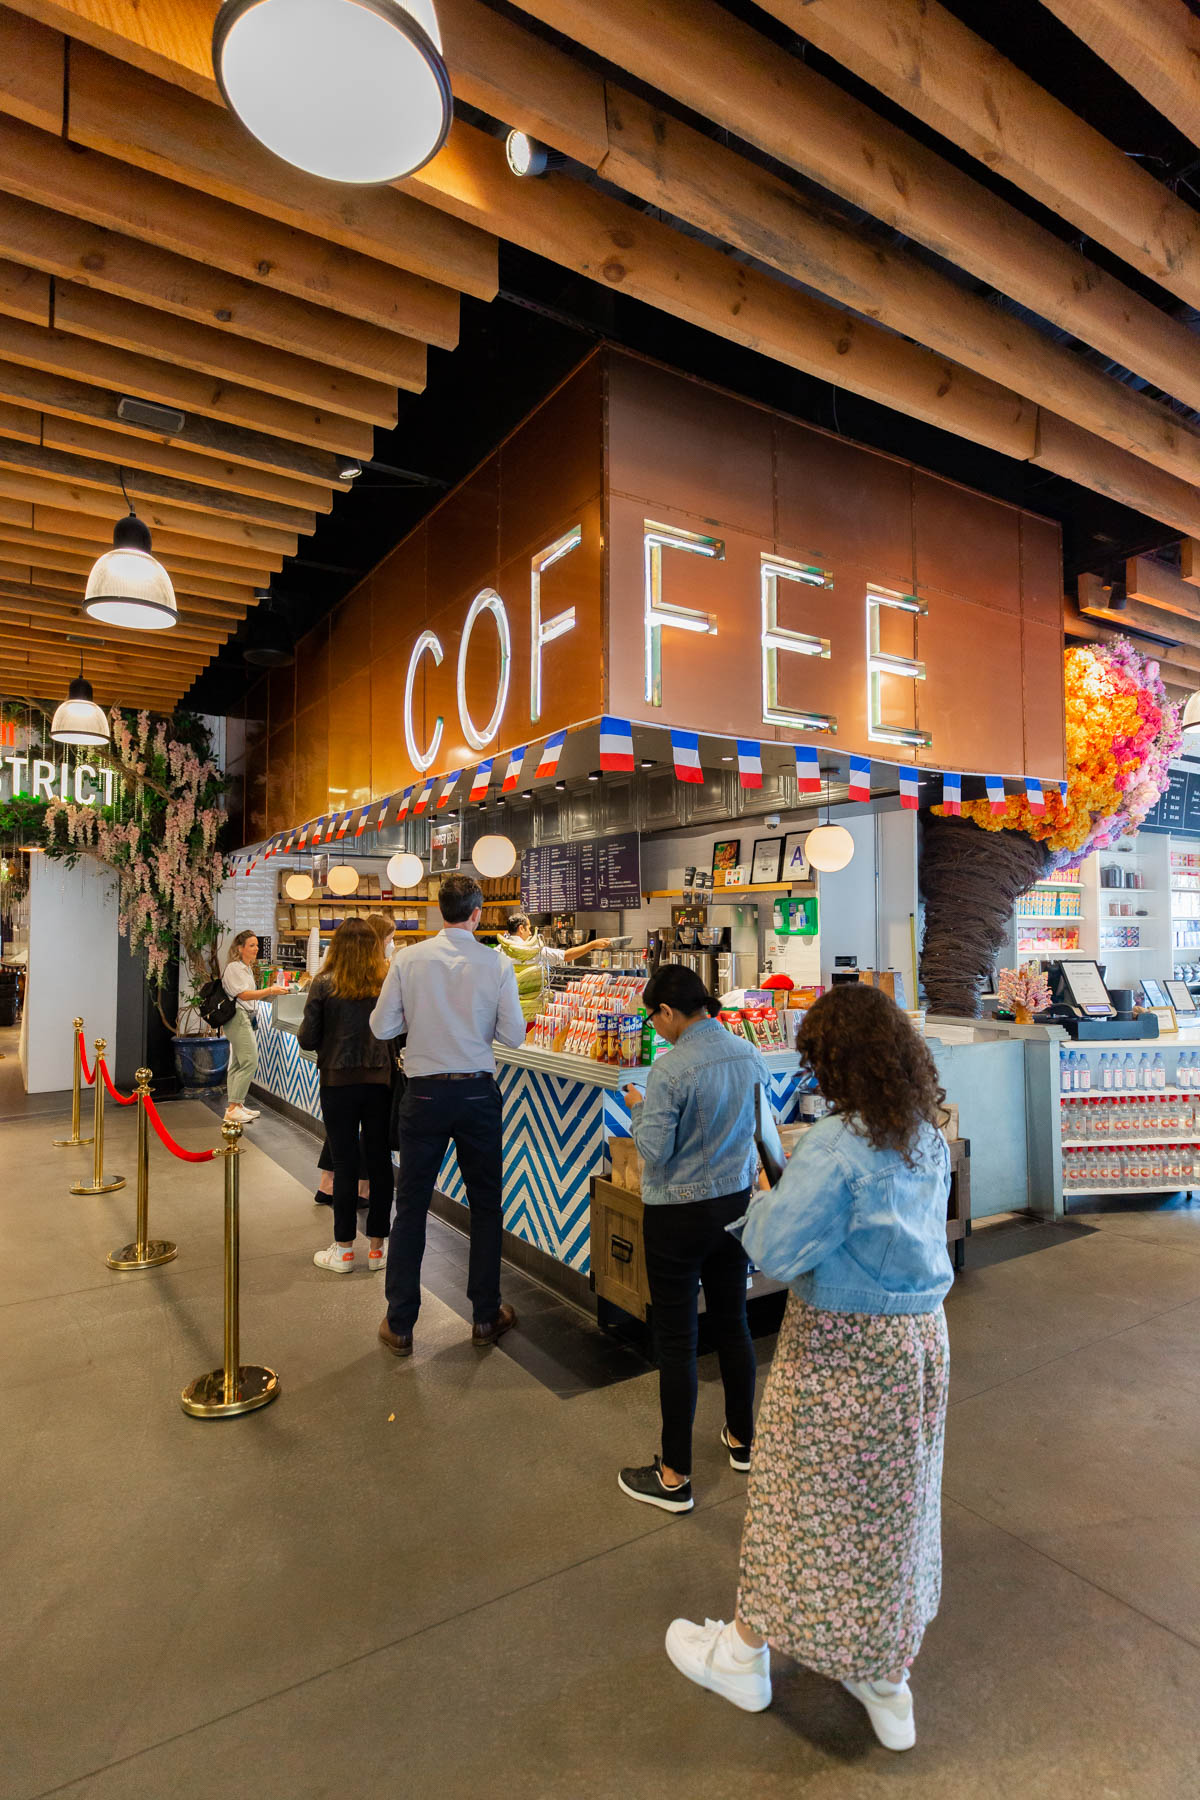 Coffee Brookfield Place
Best coffee Financial District